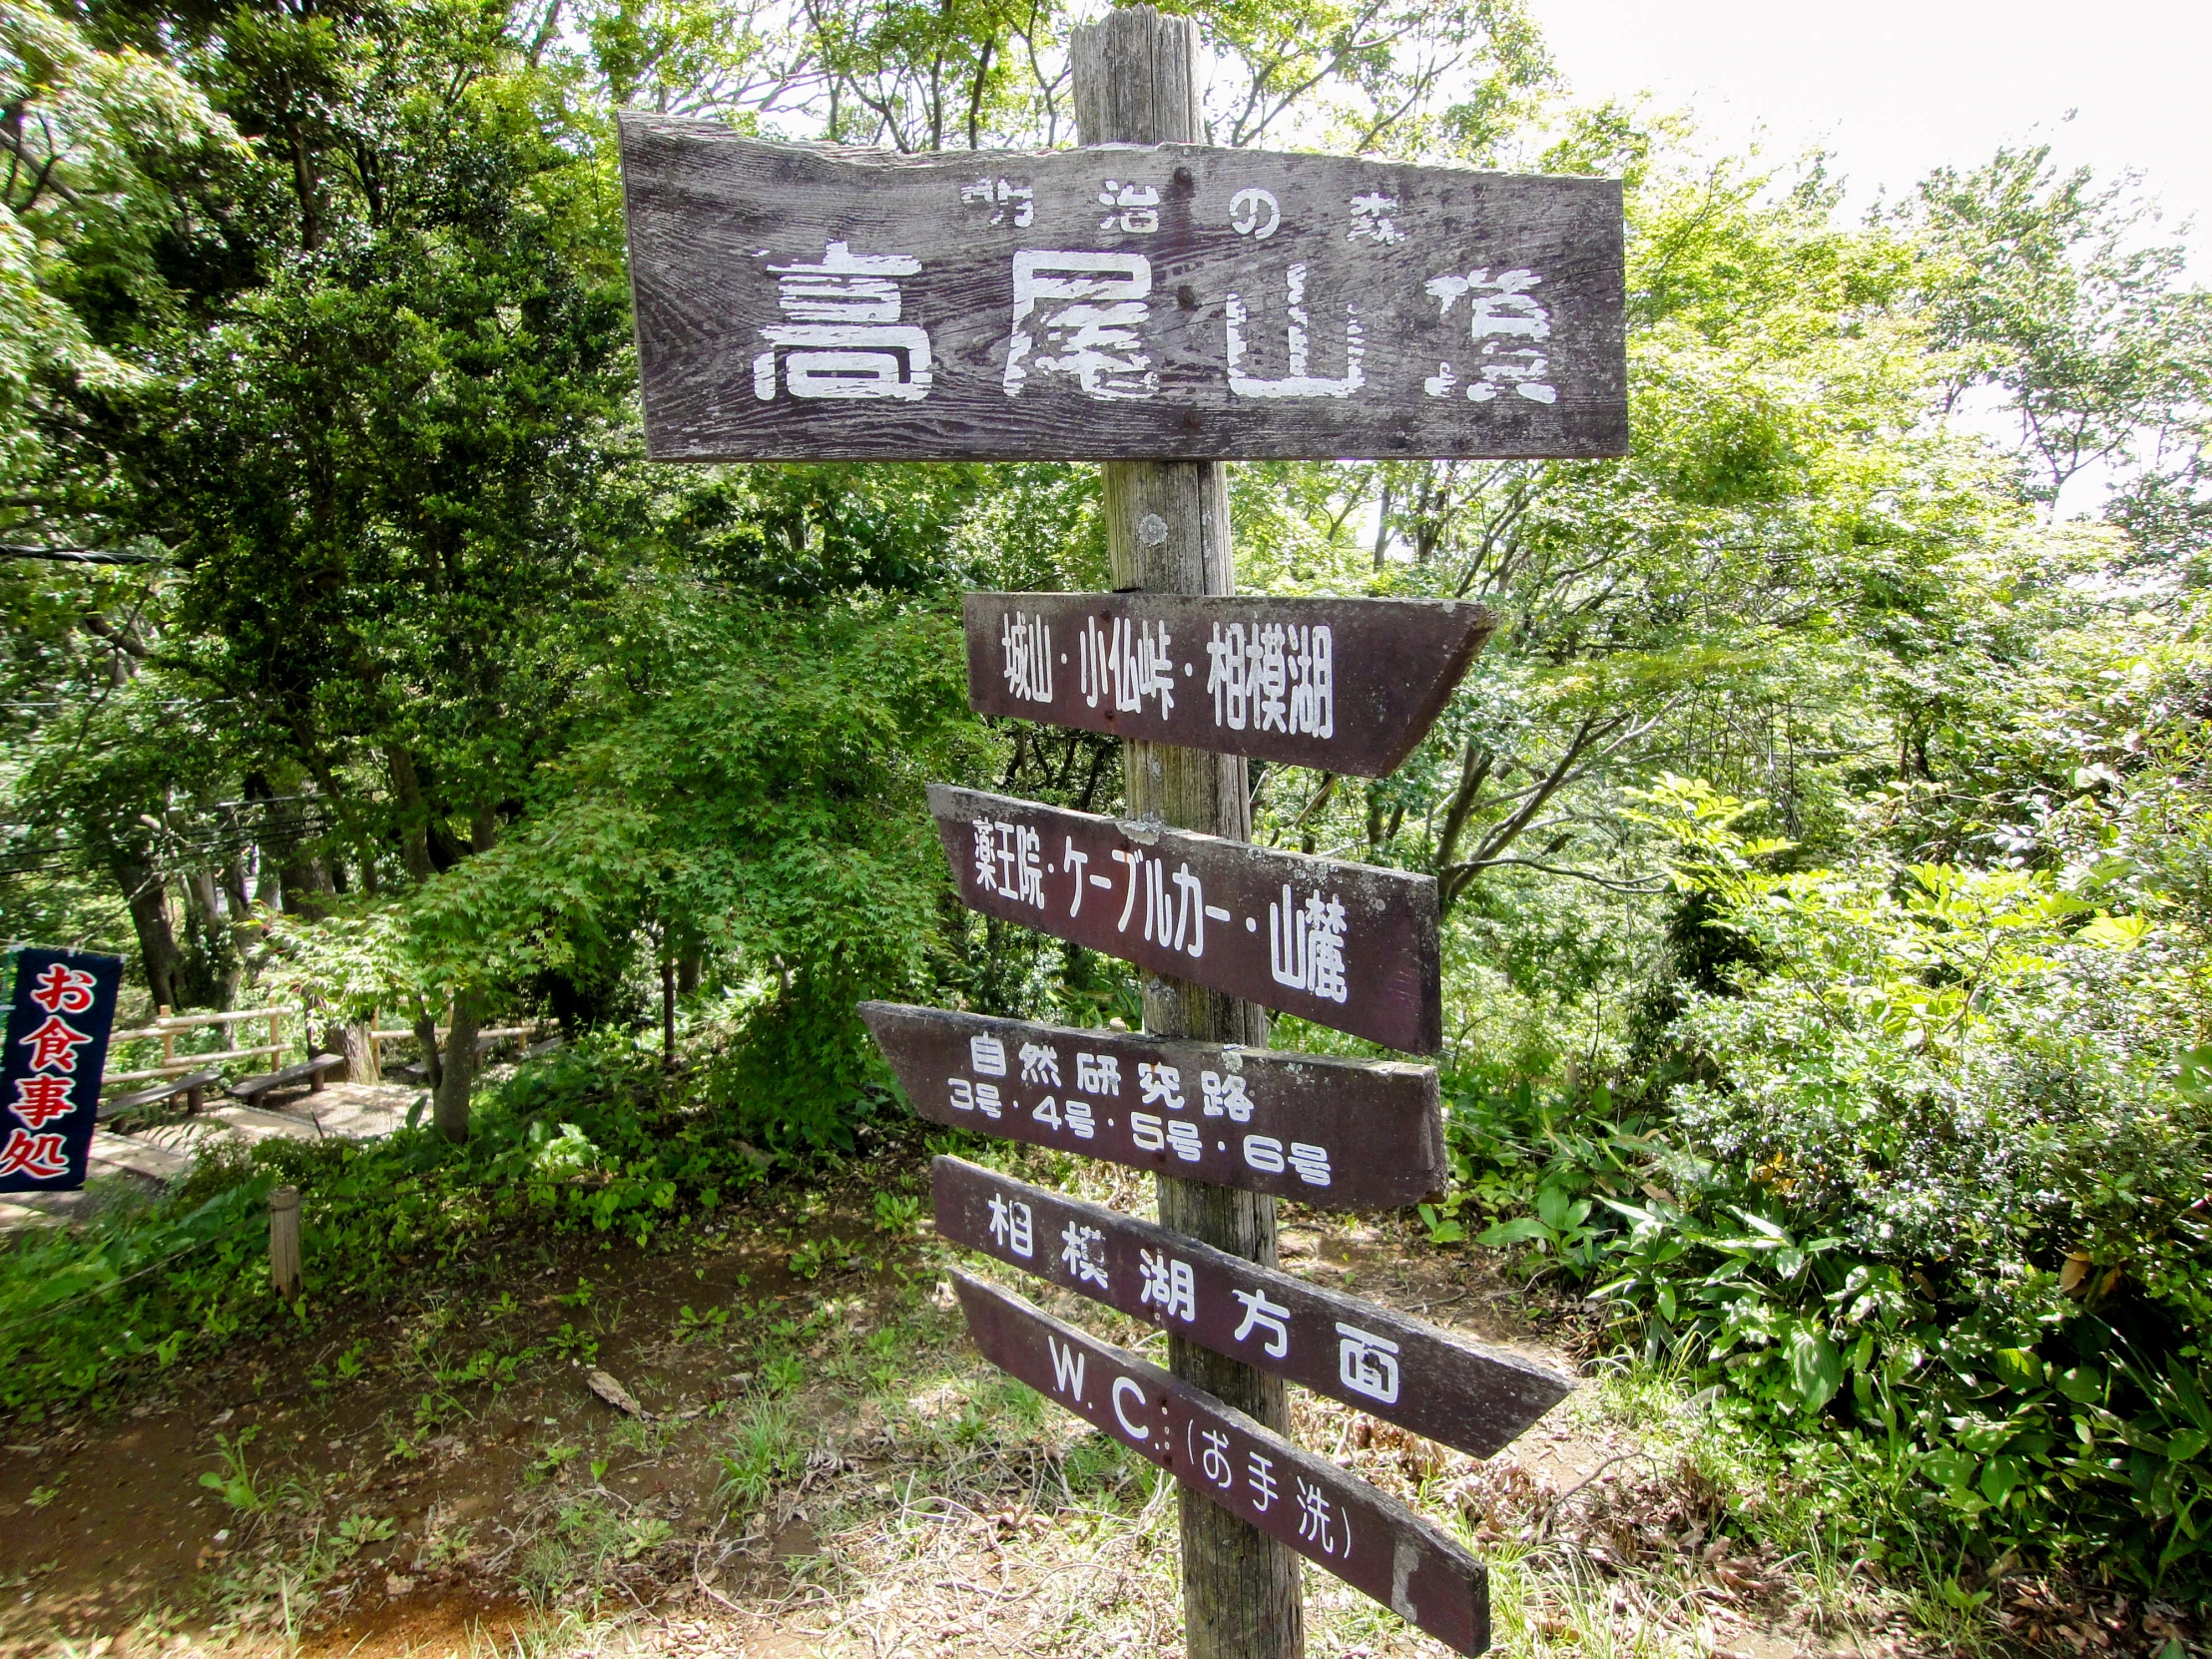 an asian direction sign in the middle of a wooded area